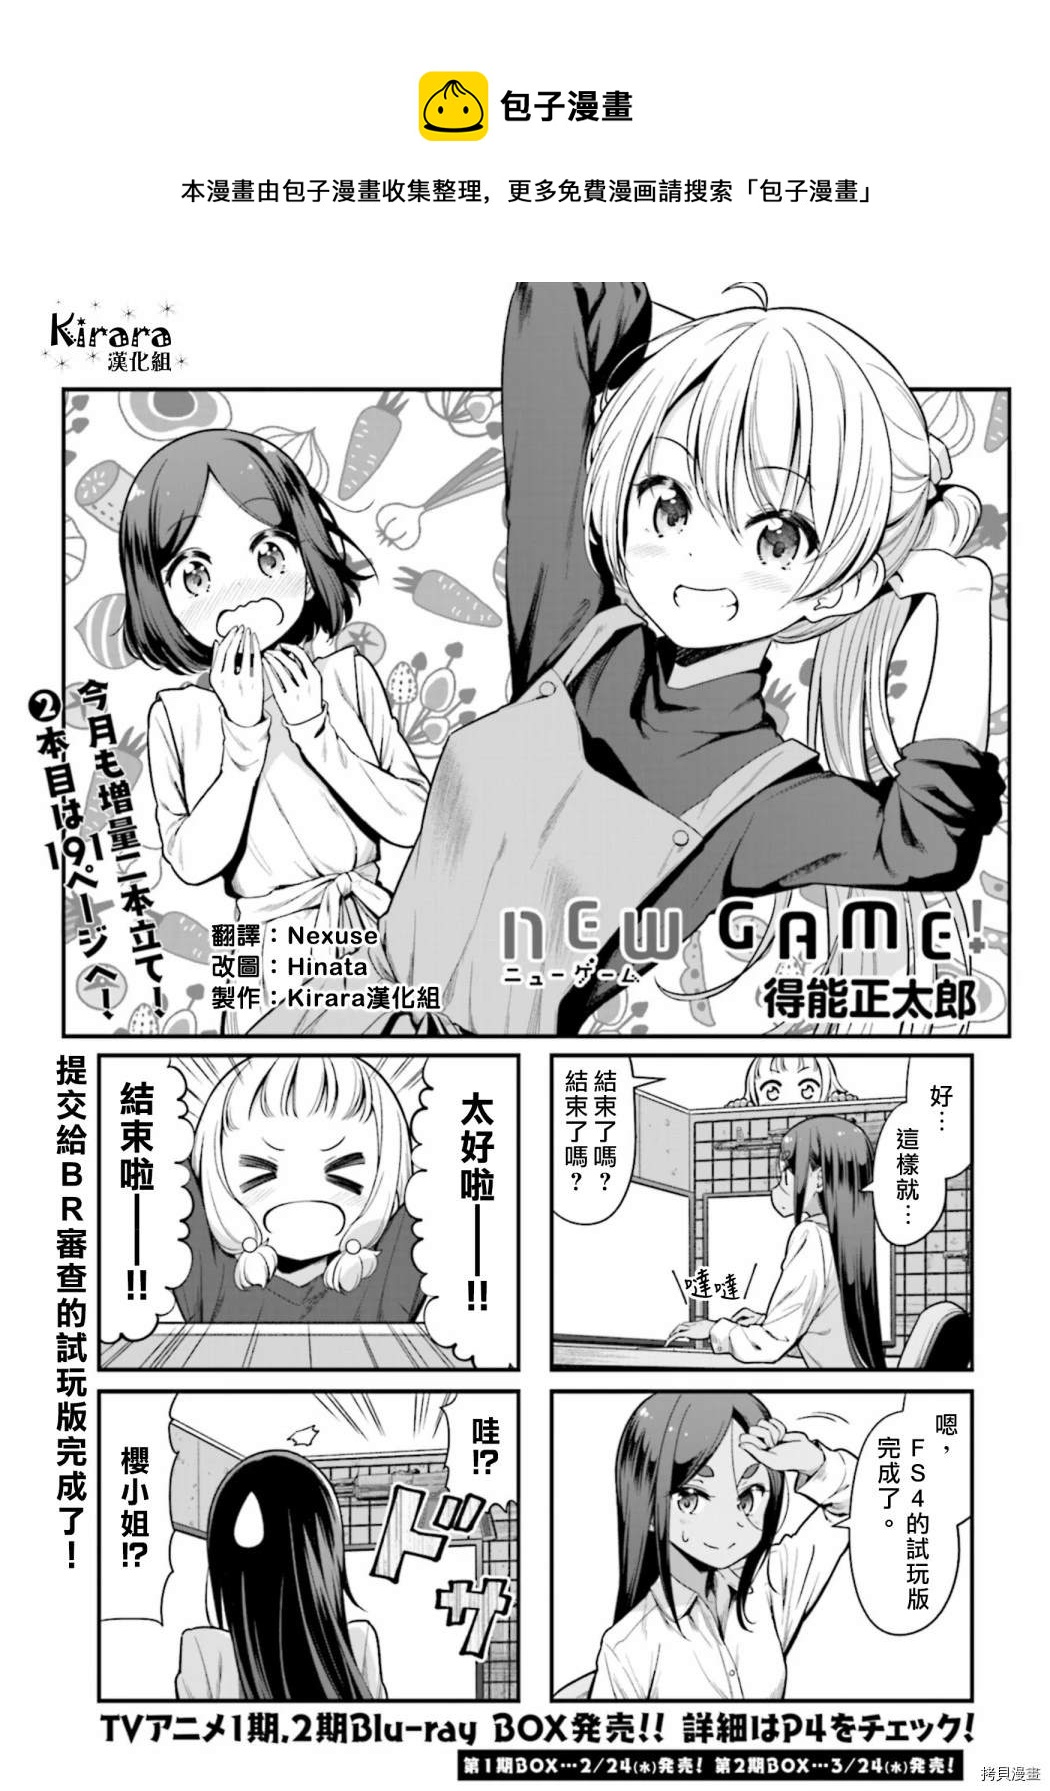 NEW GAME! - 139 第139話 - 1